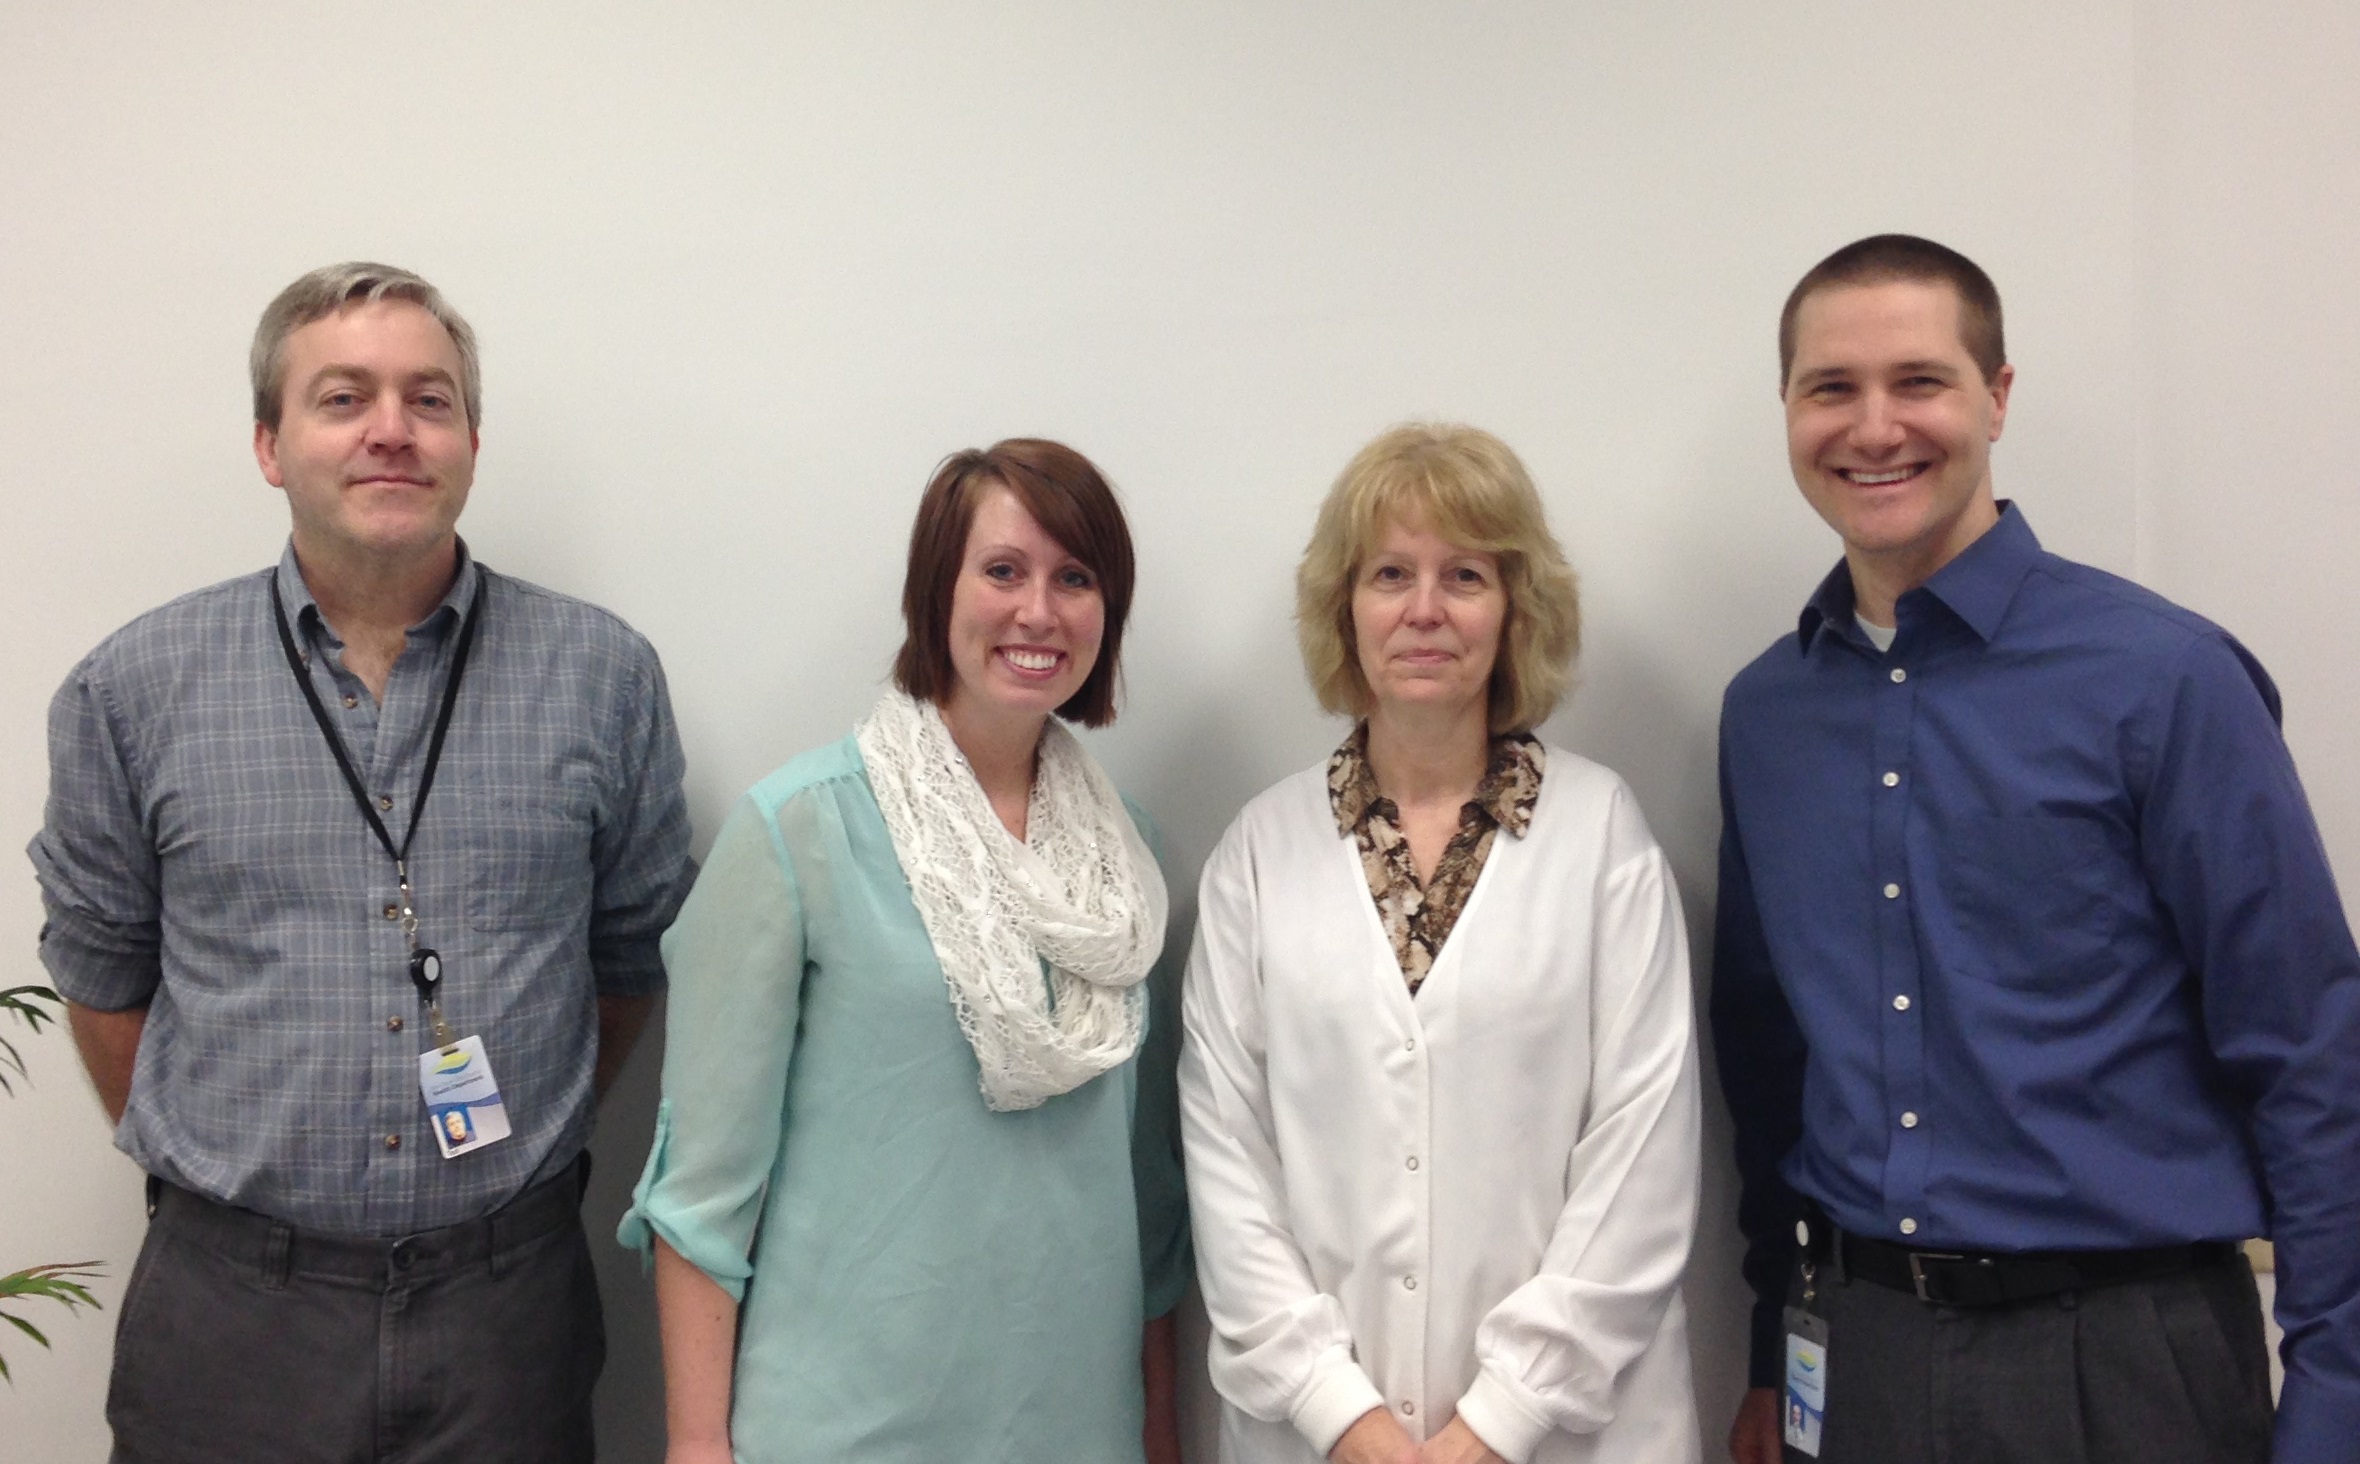 Eau Claire City-County team. From left to right: Ted Johnson, Savannah Bergman, Sue Arndt and Shane Sanderson